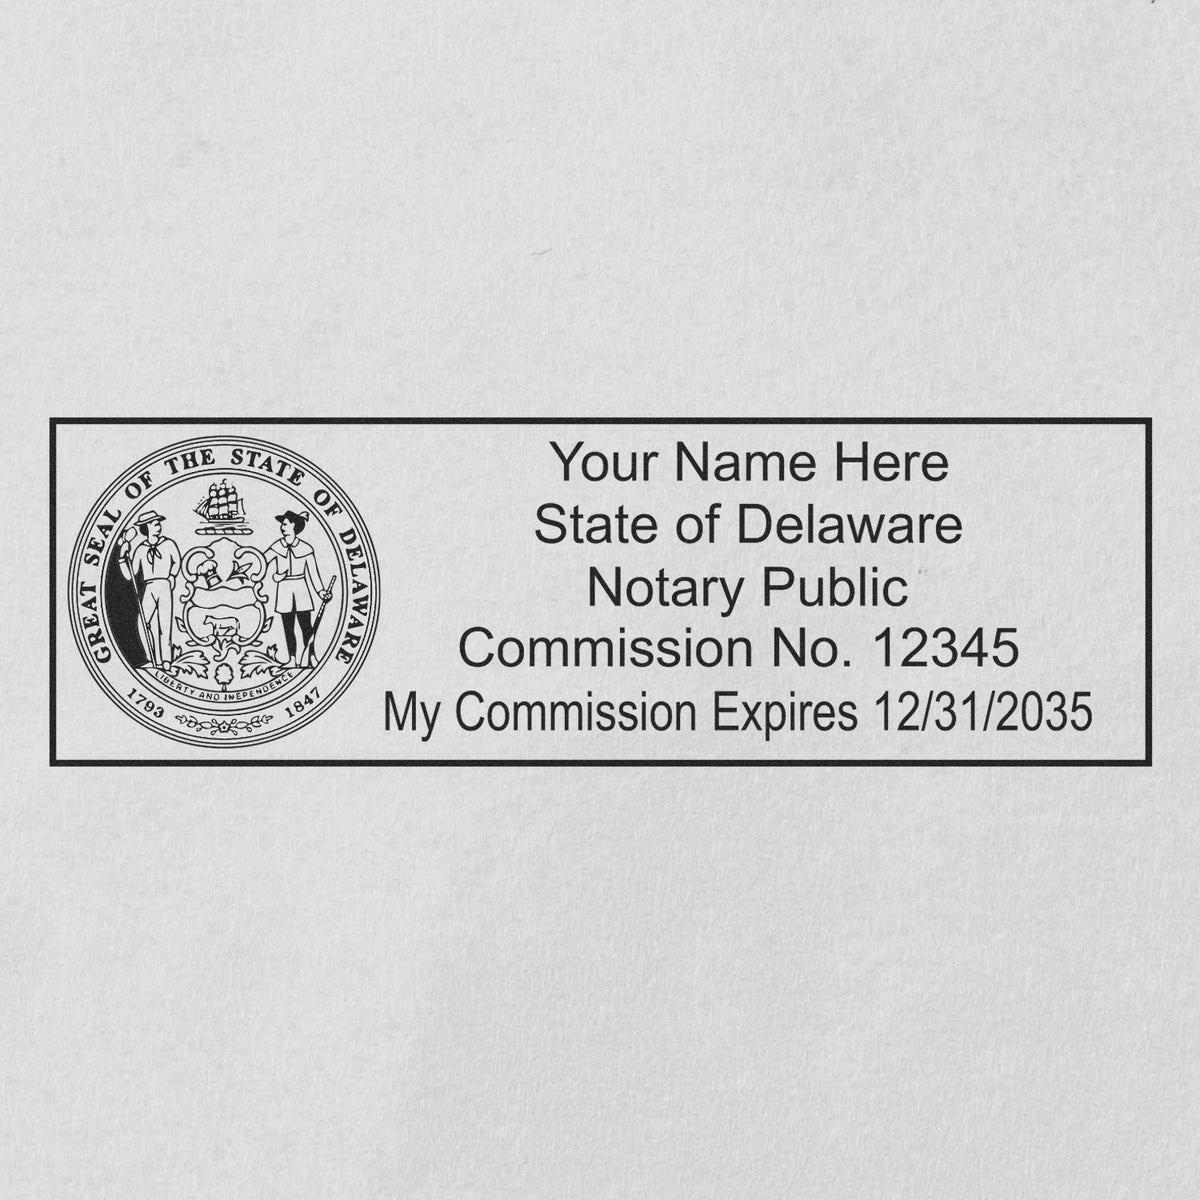 The PSI Delaware Notary Stamp stamp impression comes to life with a crisp, detailed photo on paper - showcasing true professional quality.